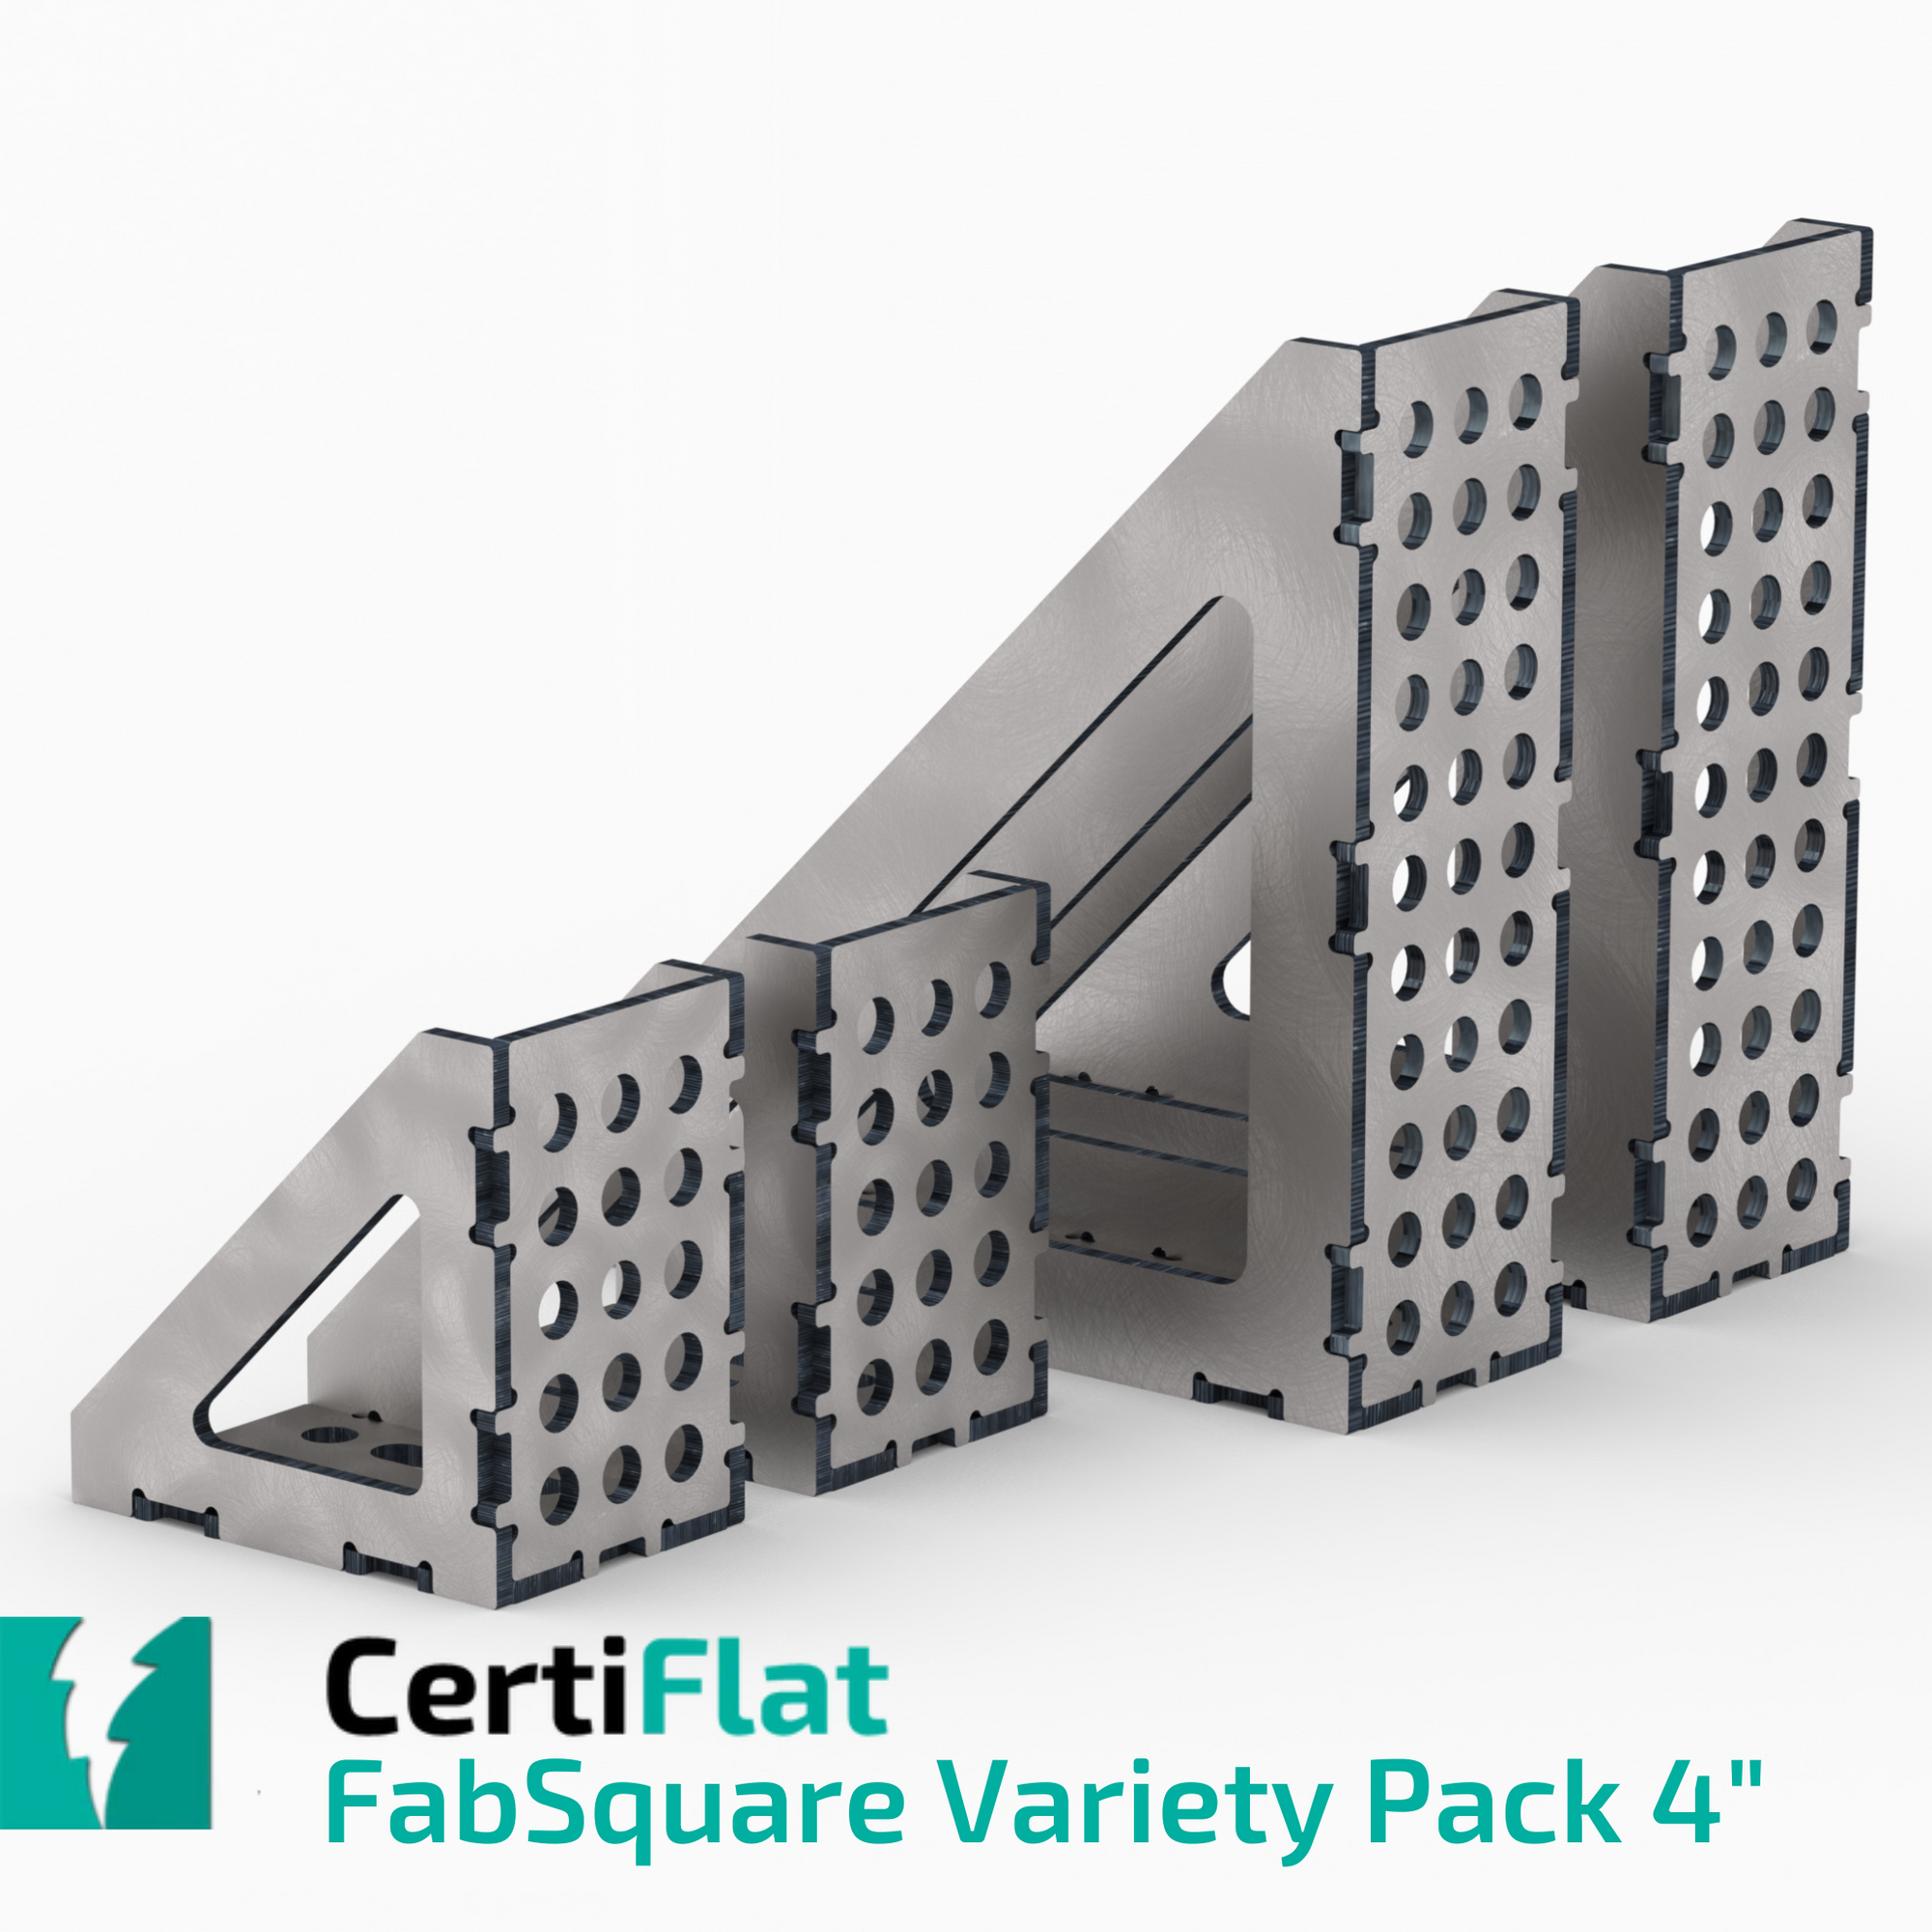 CertiFlat FabSquare Variety FabSquare 4" Pack  - VFS4